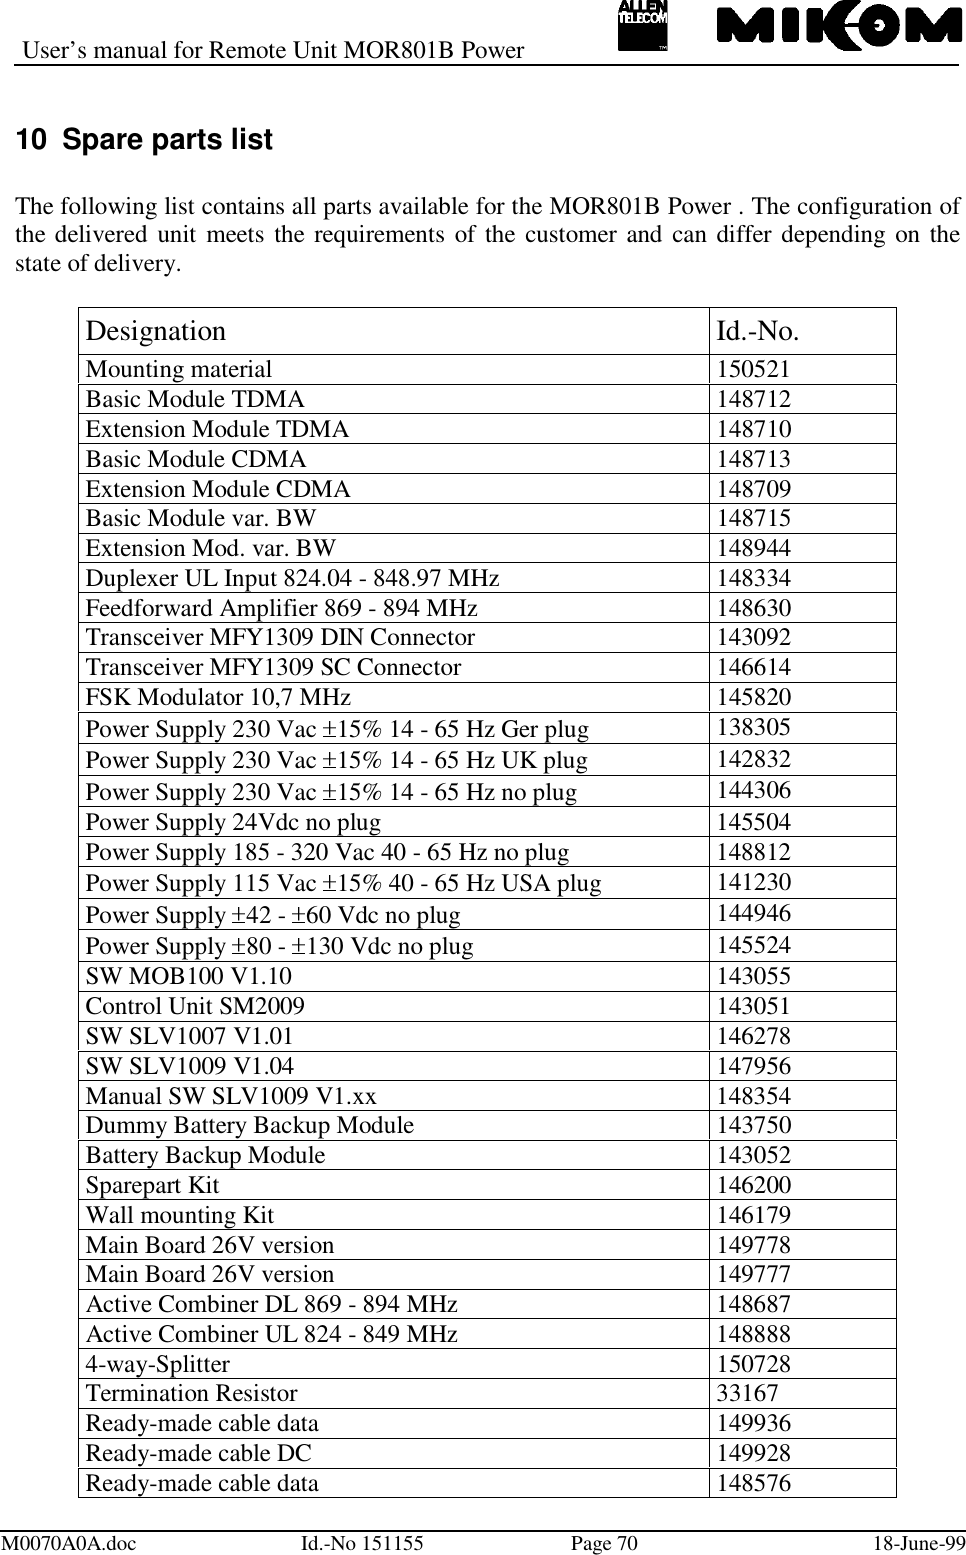 User’s manual for Remote Unit MOR801B PowerM0070A0A.doc Id.-No 151155 Page 70 18-June-9910  Spare parts listThe following list contains all parts available for the MOR801B Power . The configuration ofthe delivered unit meets the requirements of the customer and can differ depending on thestate of delivery.Designation Id.-No.Mounting material 150521Basic Module TDMA 148712Extension Module TDMA 148710Basic Module CDMA 148713Extension Module CDMA 148709Basic Module var. BW 148715Extension Mod. var. BW 148944Duplexer UL Input 824.04 - 848.97 MHz 148334Feedforward Amplifier 869 - 894 MHz 148630Transceiver MFY1309 DIN Connector 143092Transceiver MFY1309 SC Connector 146614FSK Modulator 10,7 MHz 145820Power Supply 230 Vac  15% 14 - 65 Hz Ger plug 138305Power Supply 230 Vac  15% 14 - 65 Hz UK plug 142832Power Supply 230 Vac  15% 14 - 65 Hz no plug 144306Power Supply 24Vdc no plug 145504Power Supply 185 - 320 Vac 40 - 65 Hz no plug 148812Power Supply 115 Vac  15% 40 - 65 Hz USA plug 141230Power Supply  42 -  60 Vdc no plug 144946Power Supply  80 -  130 Vdc no plug 145524SW MOB100 V1.10 143055Control Unit SM2009 143051SW SLV1007 V1.01 146278SW SLV1009 V1.04 147956Manual SW SLV1009 V1.xx 148354Dummy Battery Backup Module 143750Battery Backup Module 143052Sparepart Kit 146200Wall mounting Kit 146179Main Board 26V version 149778Main Board 26V version 149777Active Combiner DL 869 - 894 MHz 148687Active Combiner UL 824 - 849 MHz 1488884-way-Splitter 150728Termination Resistor 33167Ready-made cable data 149936Ready-made cable DC 149928Ready-made cable data 148576